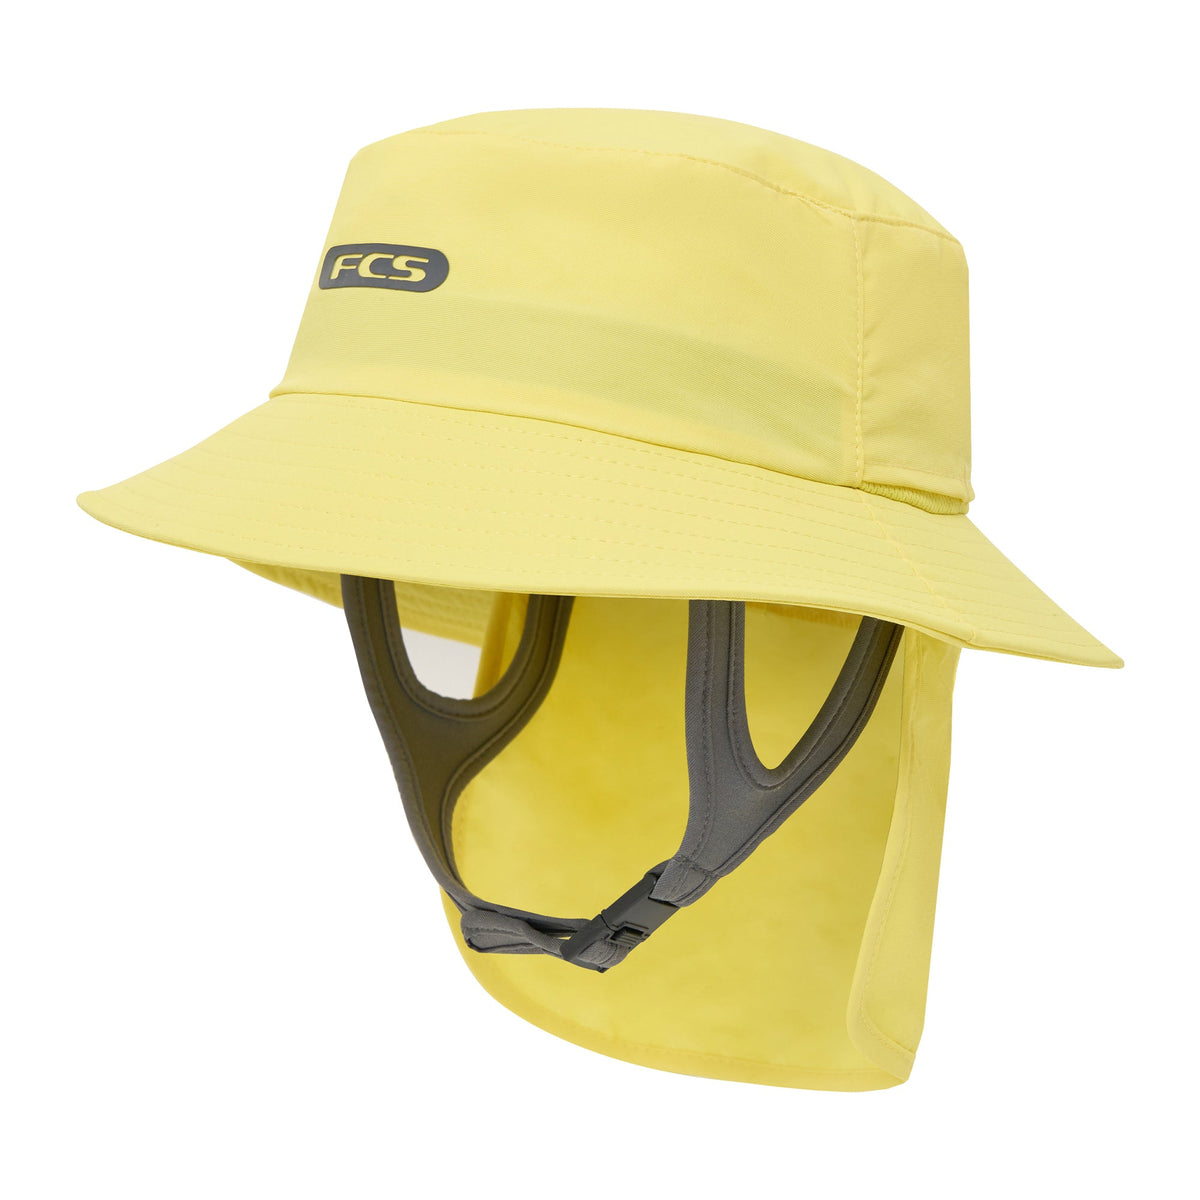 FCS ESSENTIAL SURF BUCKET HAT AT KISS SURF STORE – KEEP IT SIMPLE SURF